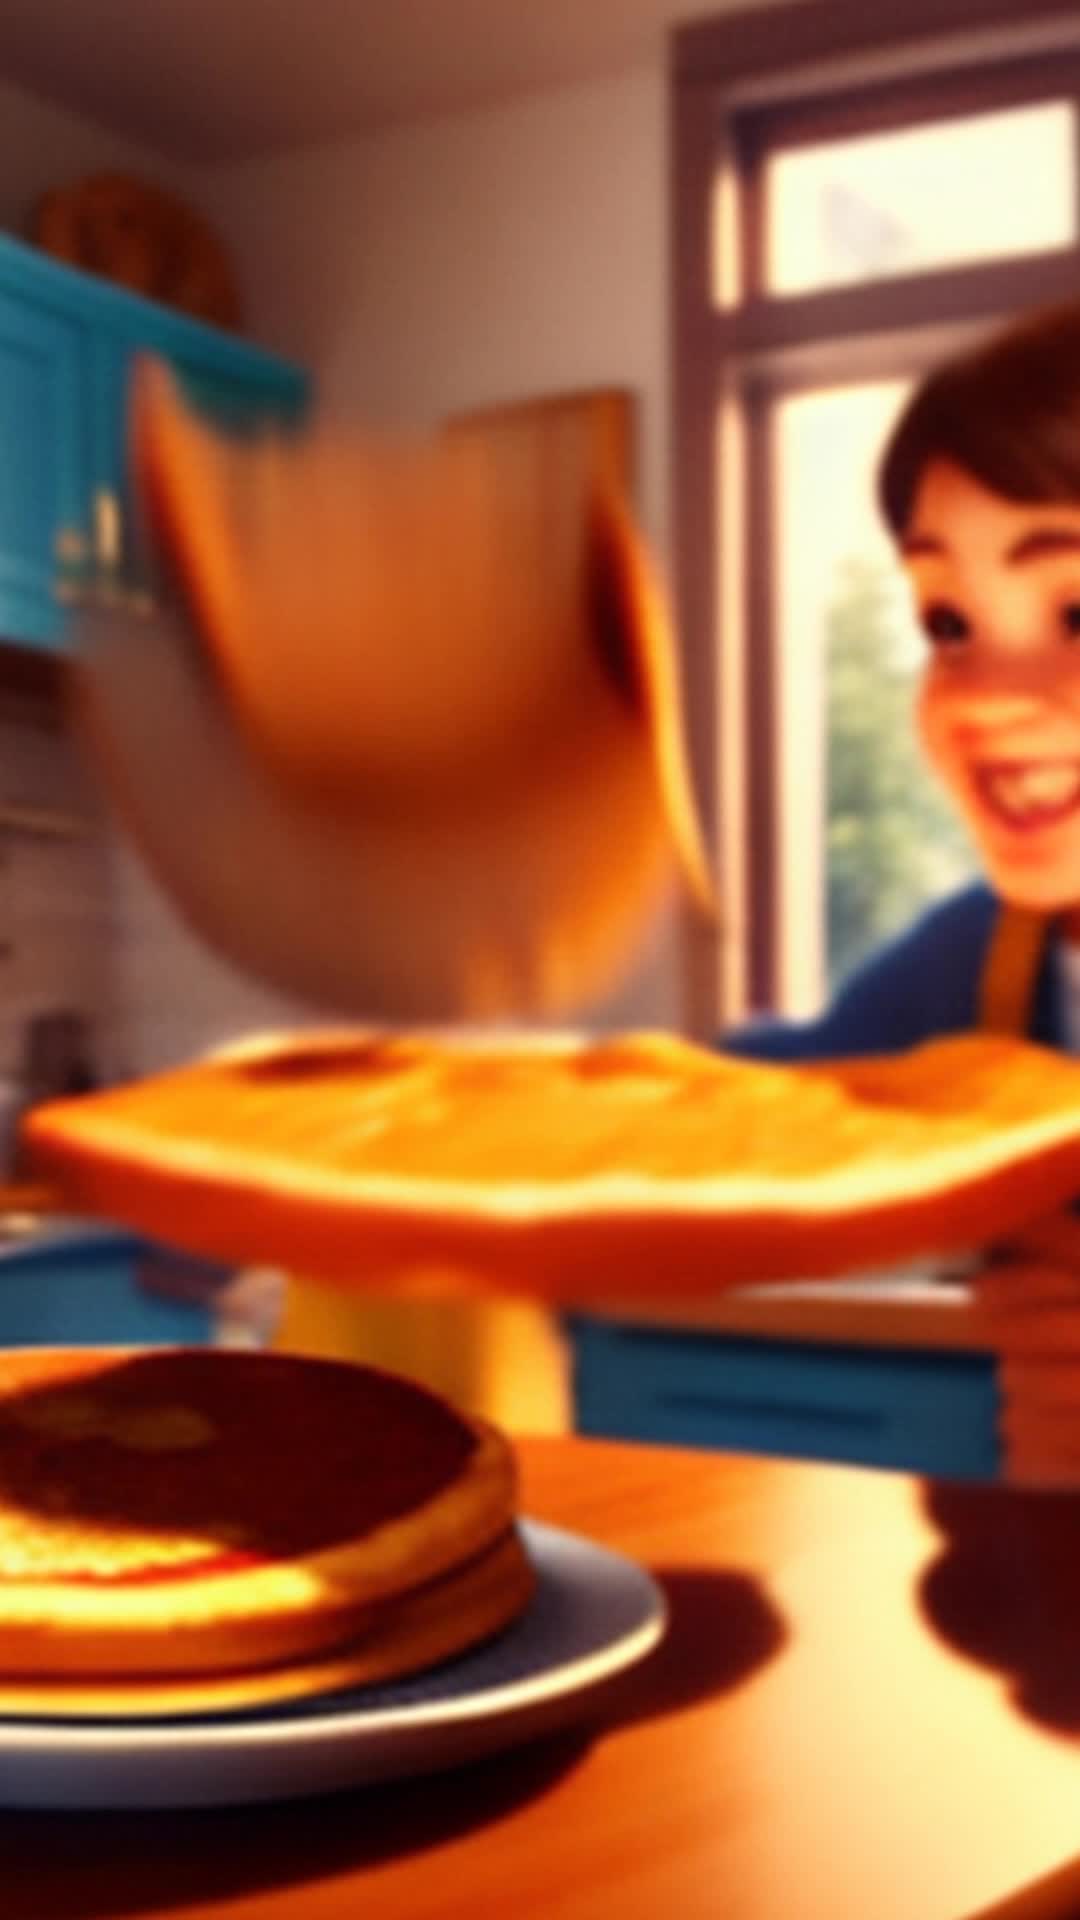 Sarah flipping pancake, high into air, catch skillfully, kitchen background, her son explaining chemical reactions, enthusiastic, morning light streaming through window, detailed pancake texture, soft shadows, close-up shot of both faces, rendered by octane